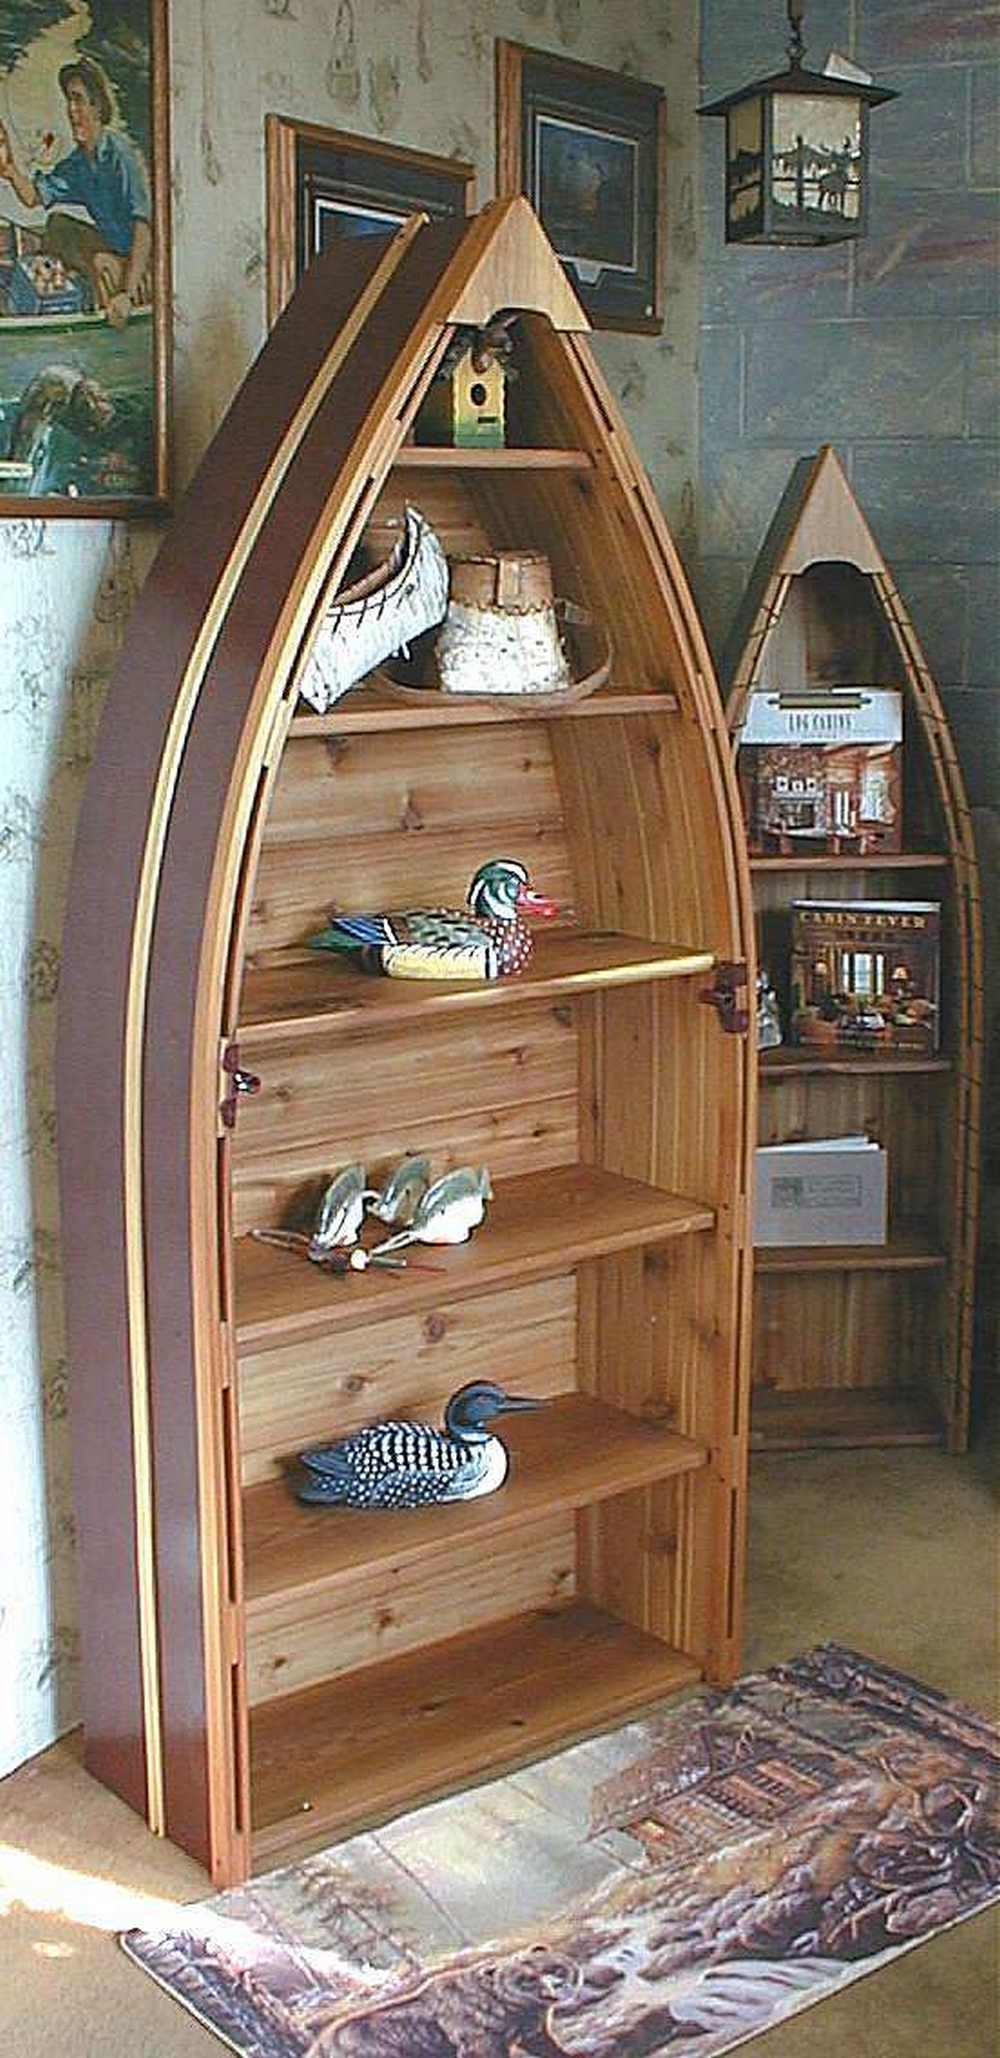 How To Build A Boat Bookshelf Your Projects Obn